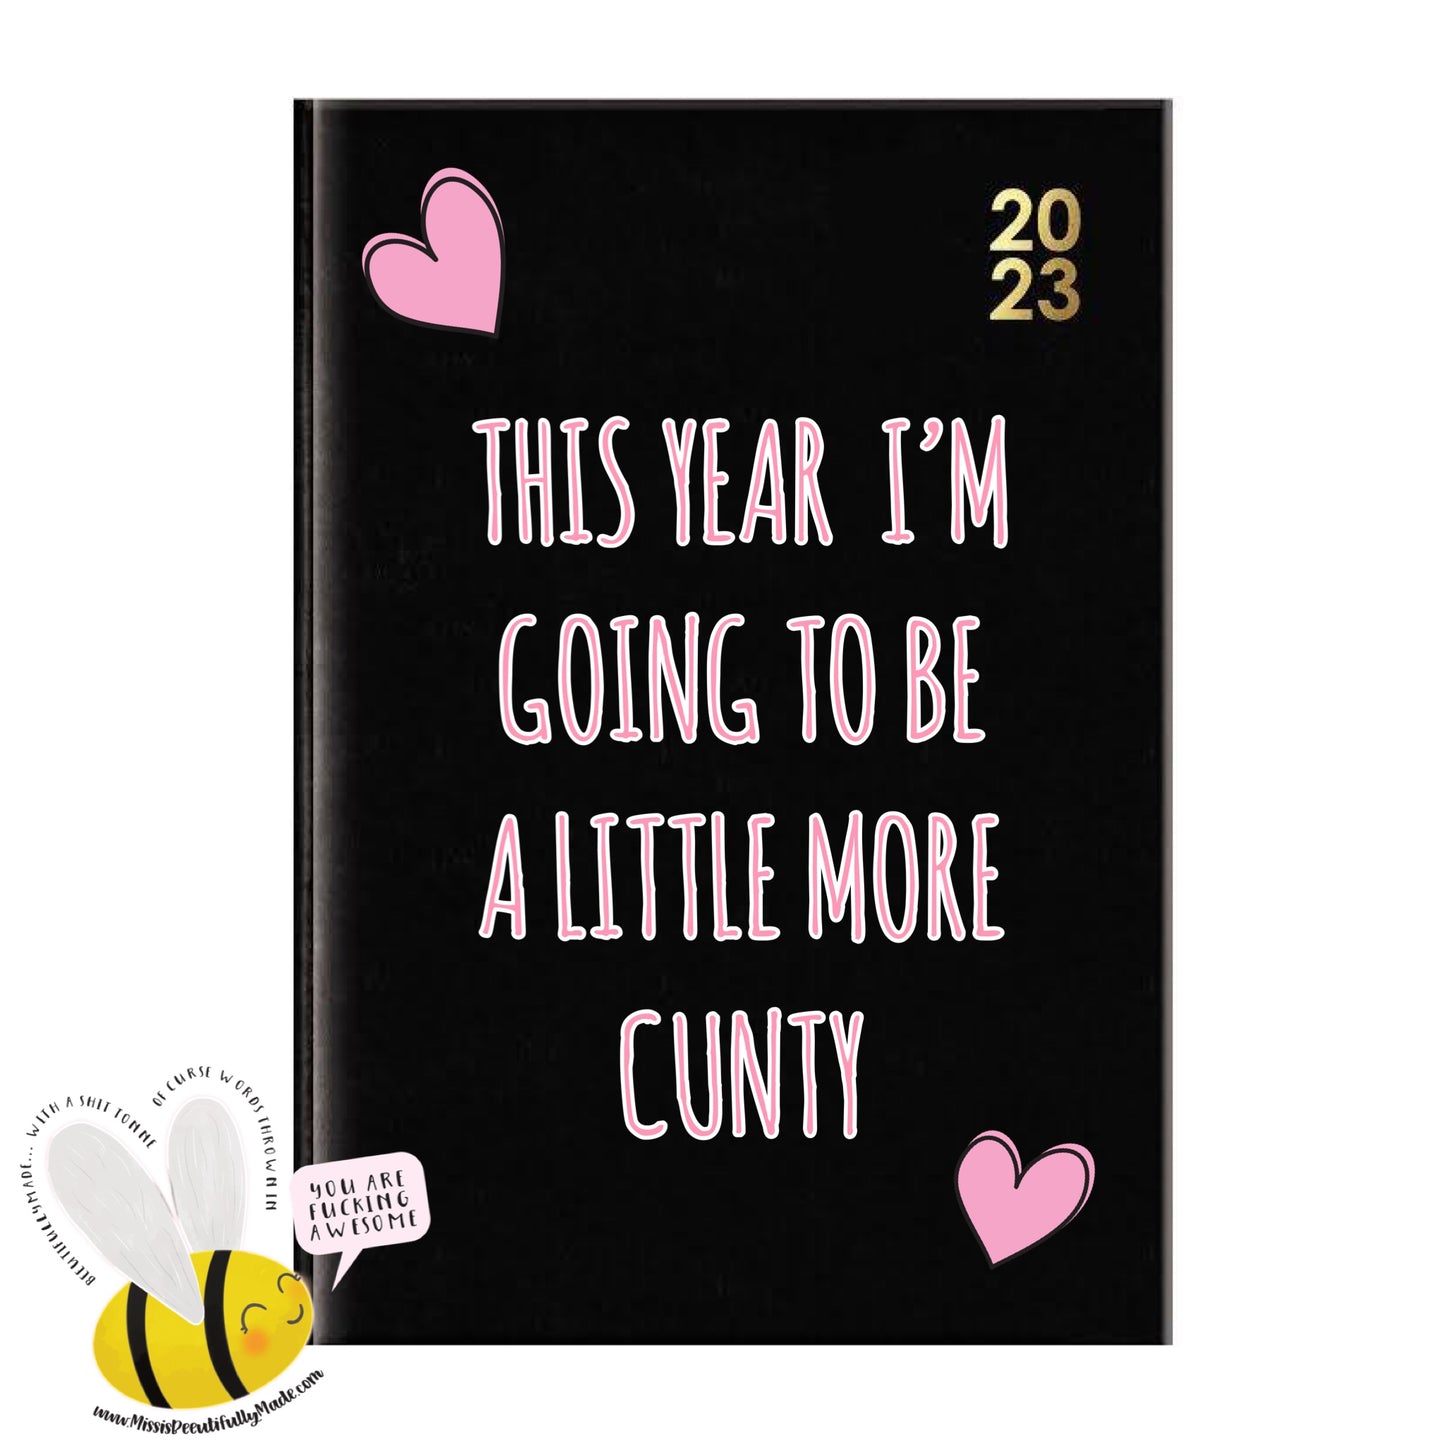 Diary 2023 - This year I’m going to be a little more cunty